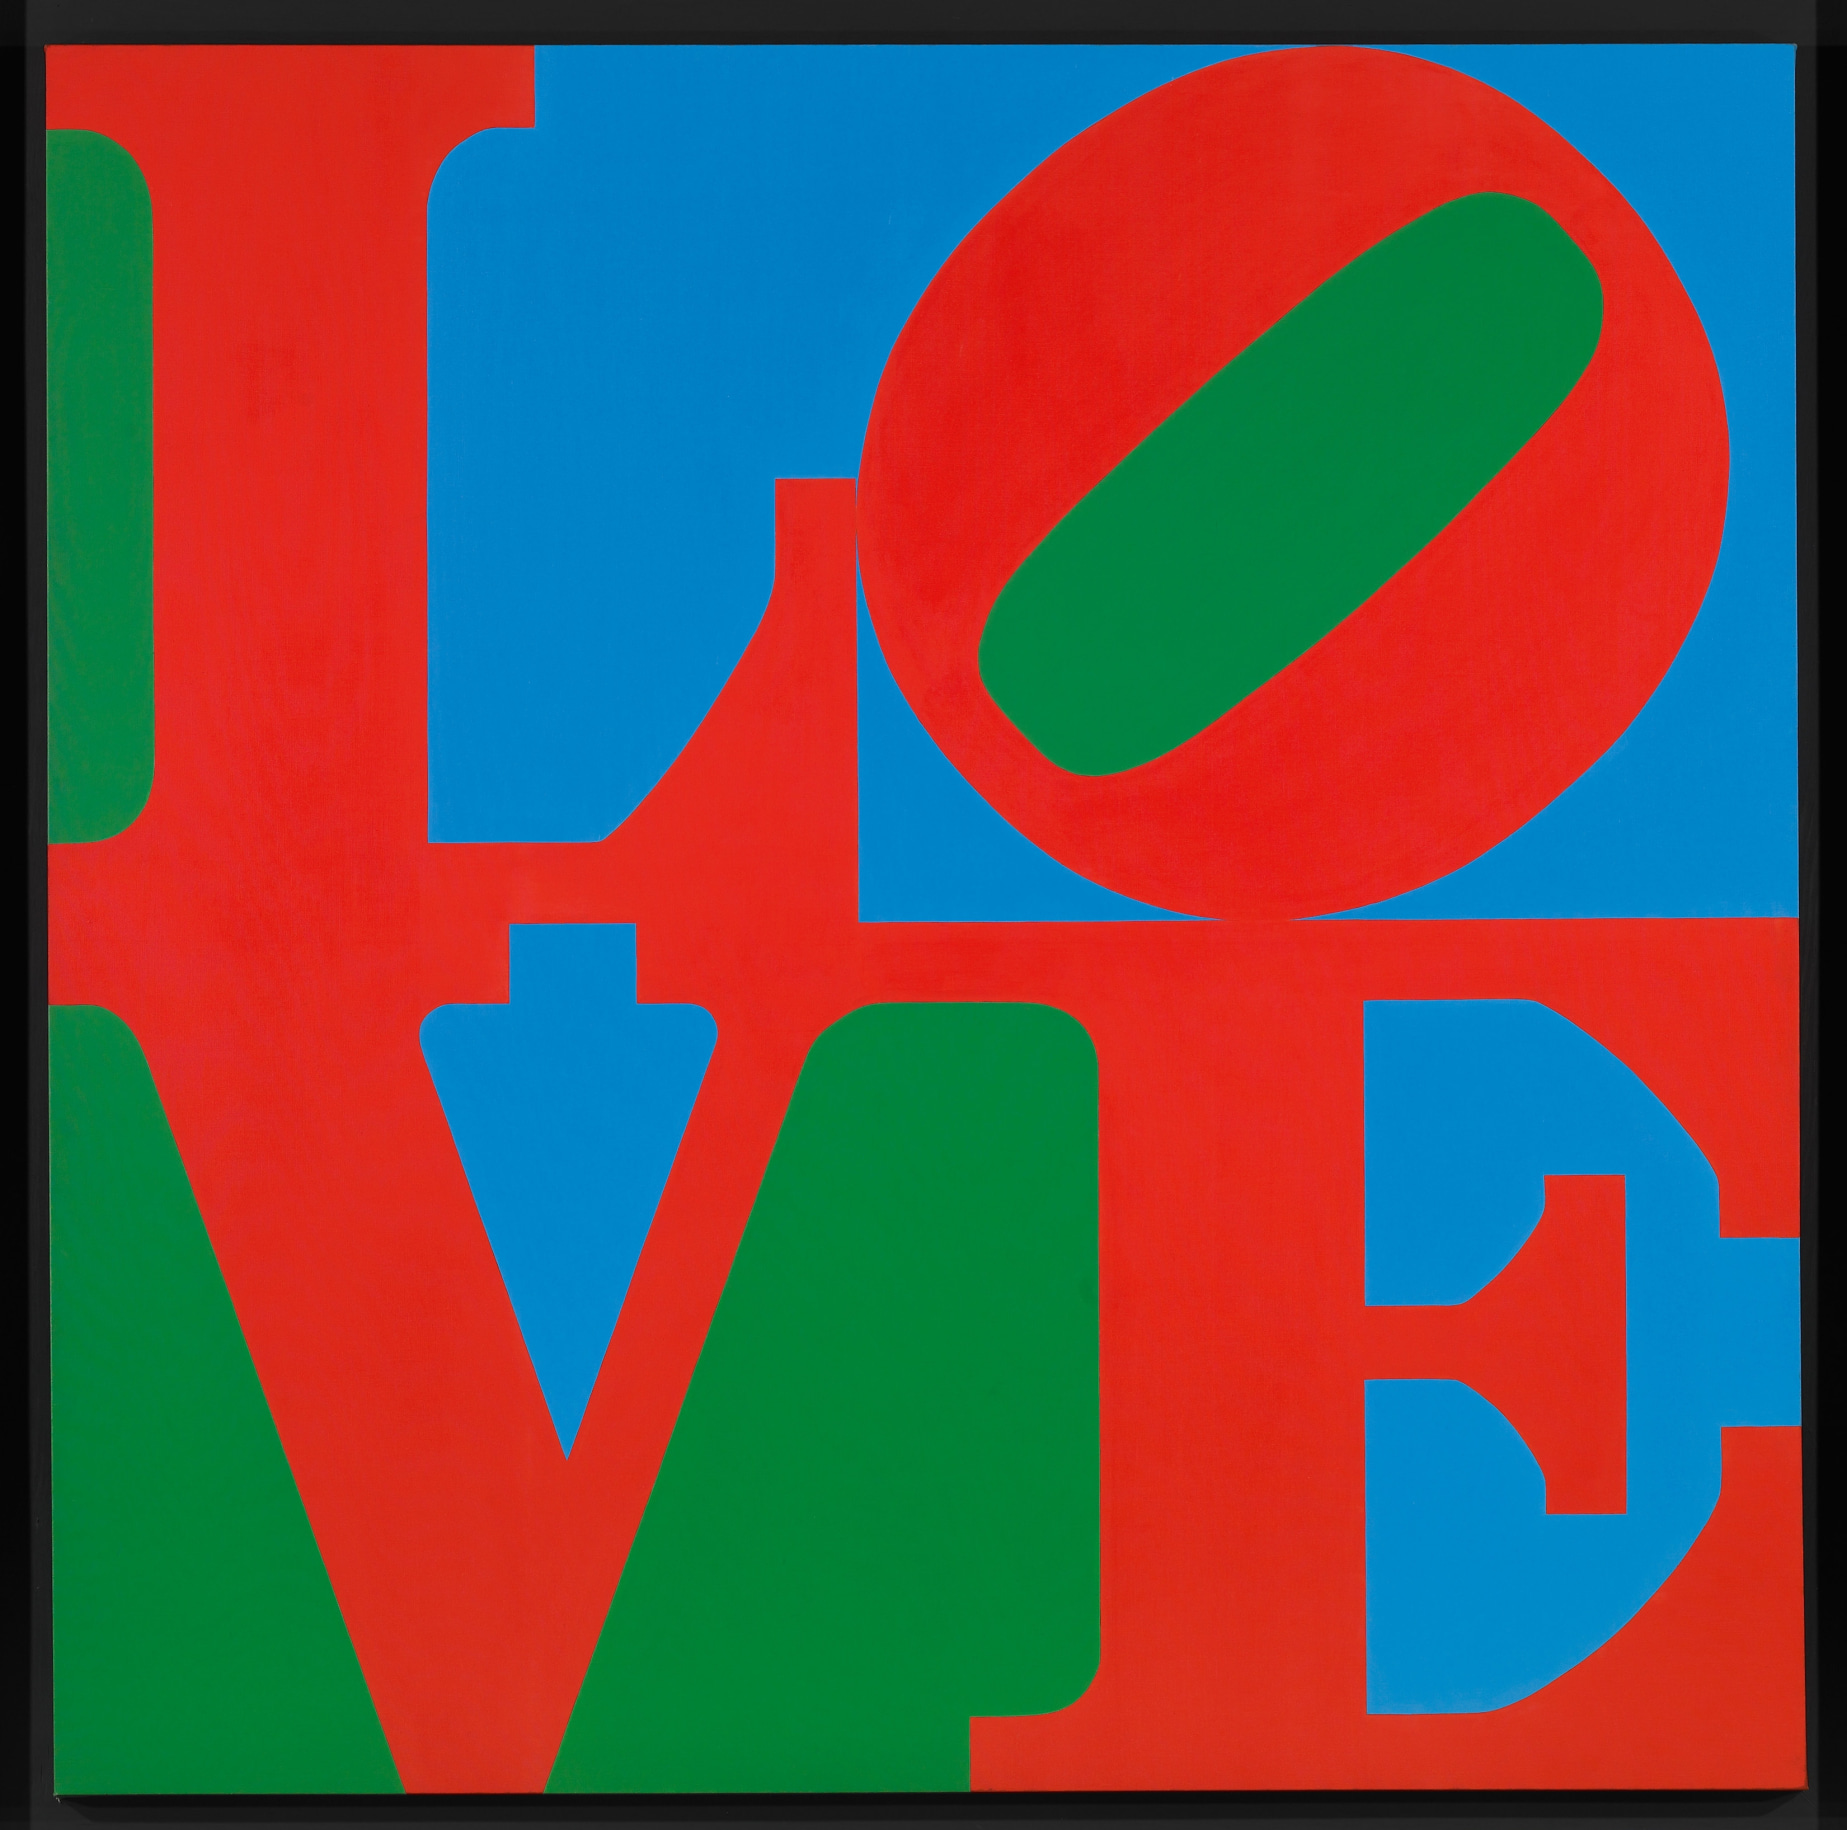 LOVE, a 72-inch square painting with the red letters L and a tilted O stacked above the letters V and E, against a green and blue background.